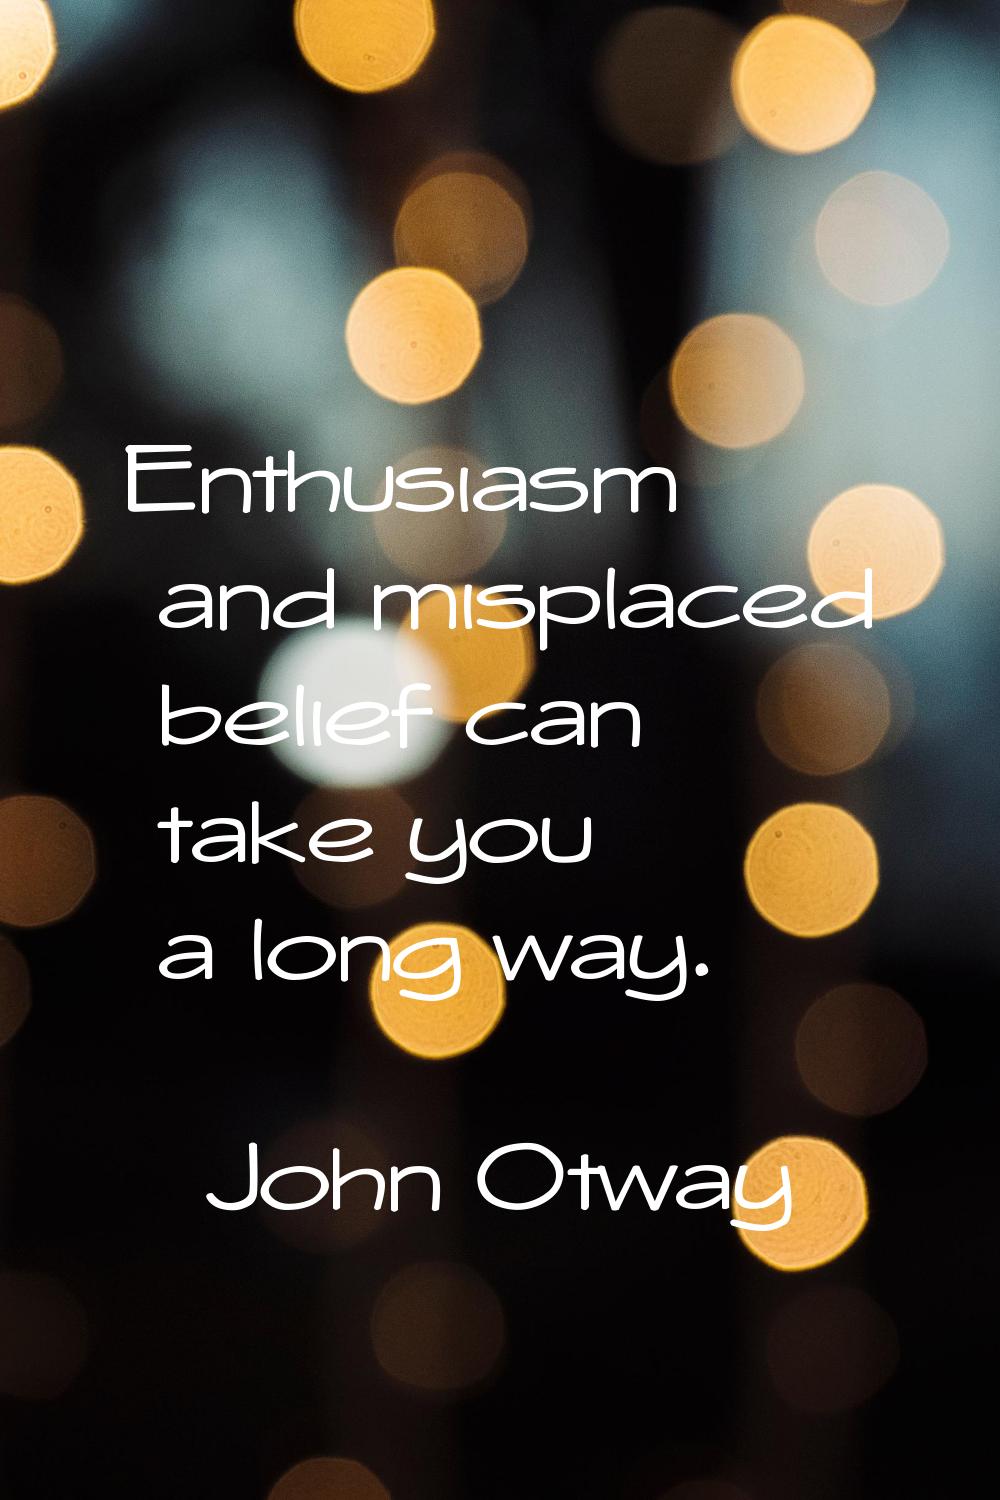 Enthusiasm and misplaced belief can take you a long way.